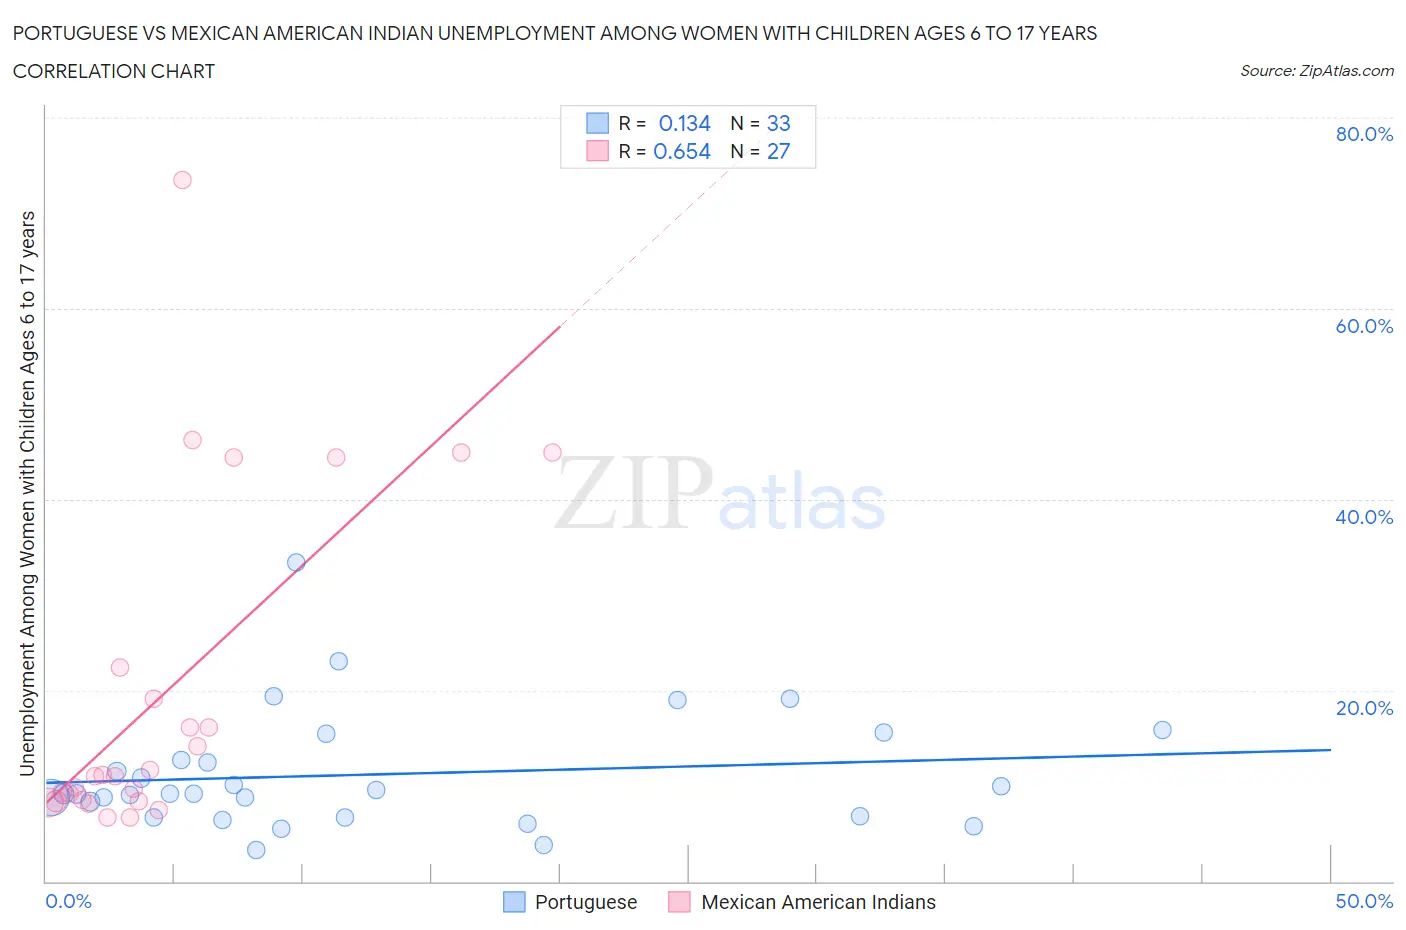 Portuguese vs Mexican American Indian Unemployment Among Women with Children Ages 6 to 17 years